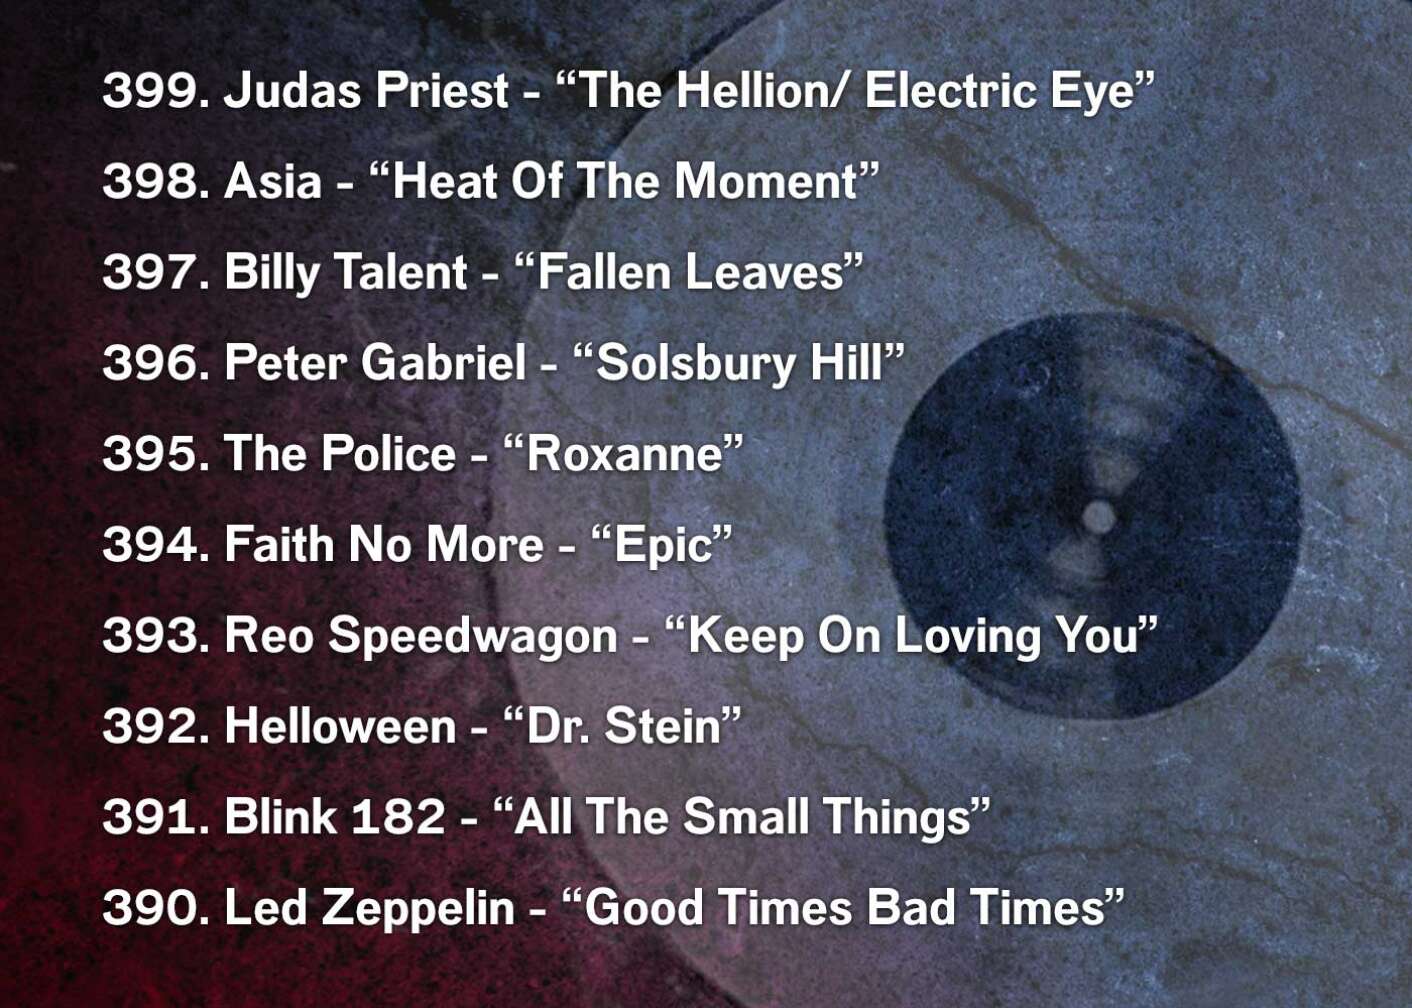 399. Judas Priest - “The Hellion/ Electric Eye” 398. Asia - “Heat Of The Moment” 397. Billy Talent - “Fallen Leaves” 396. Peter Gabriel - “Solsbury Hill” 395. The Police - “Roxanne” 394. Faith No More - “Epic” 393. Reo Speedwagon - “Keep On Loving You” 392. Helloween - “Dr. Stein” 391. Blink 182 - “All The Small Things” 390. Led Zeppelin - “Good Times Bad Times”